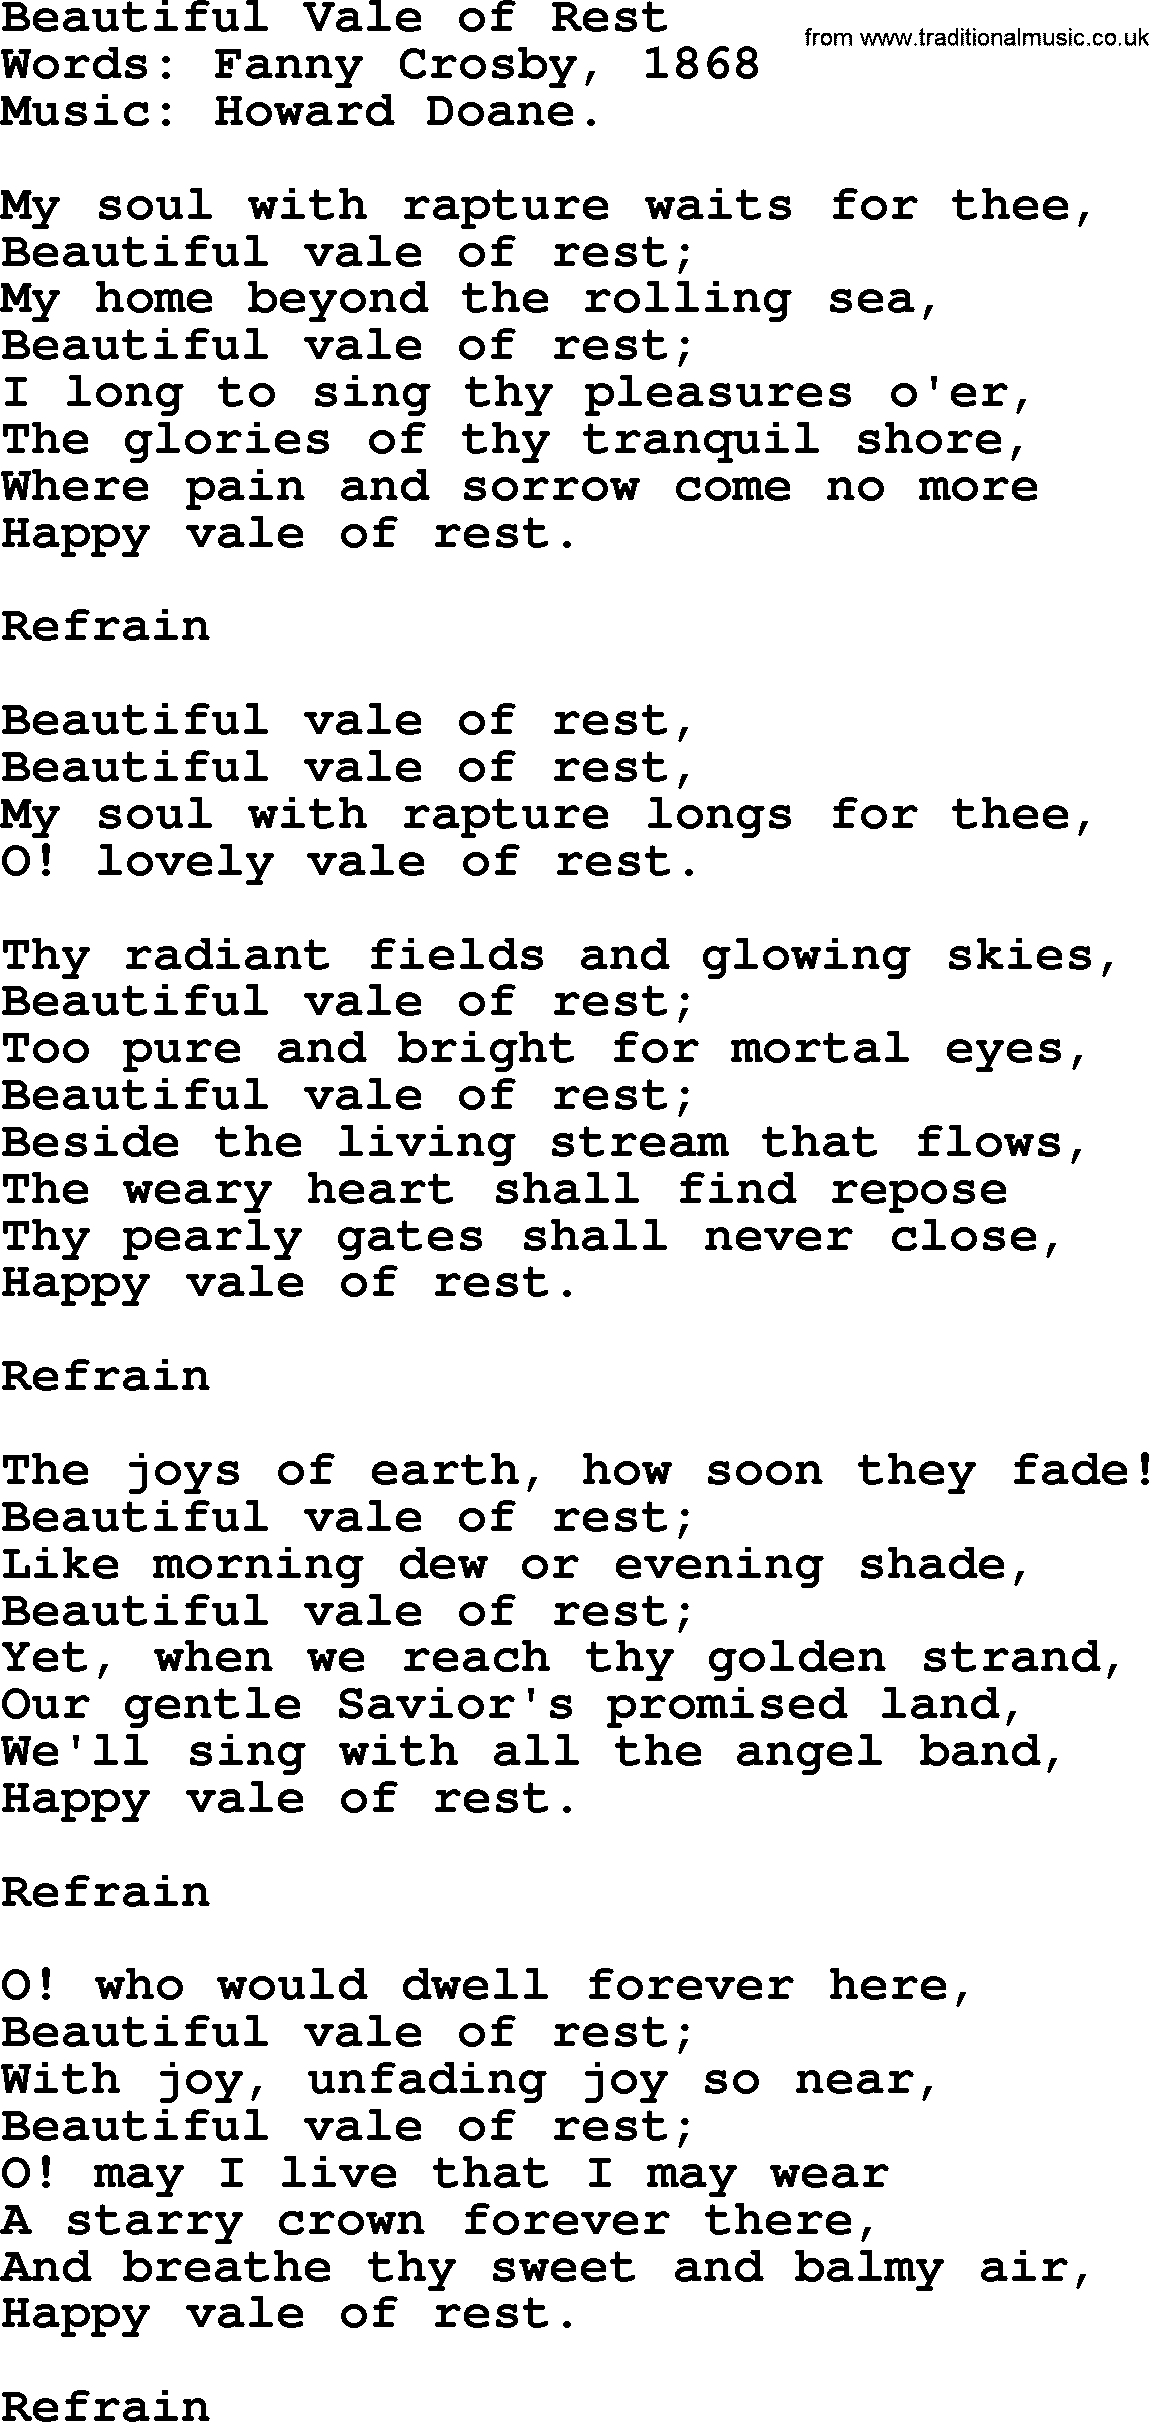 Songs and Hymns about Heaven: Beautiful Vale Of Rest lyrics with PDF